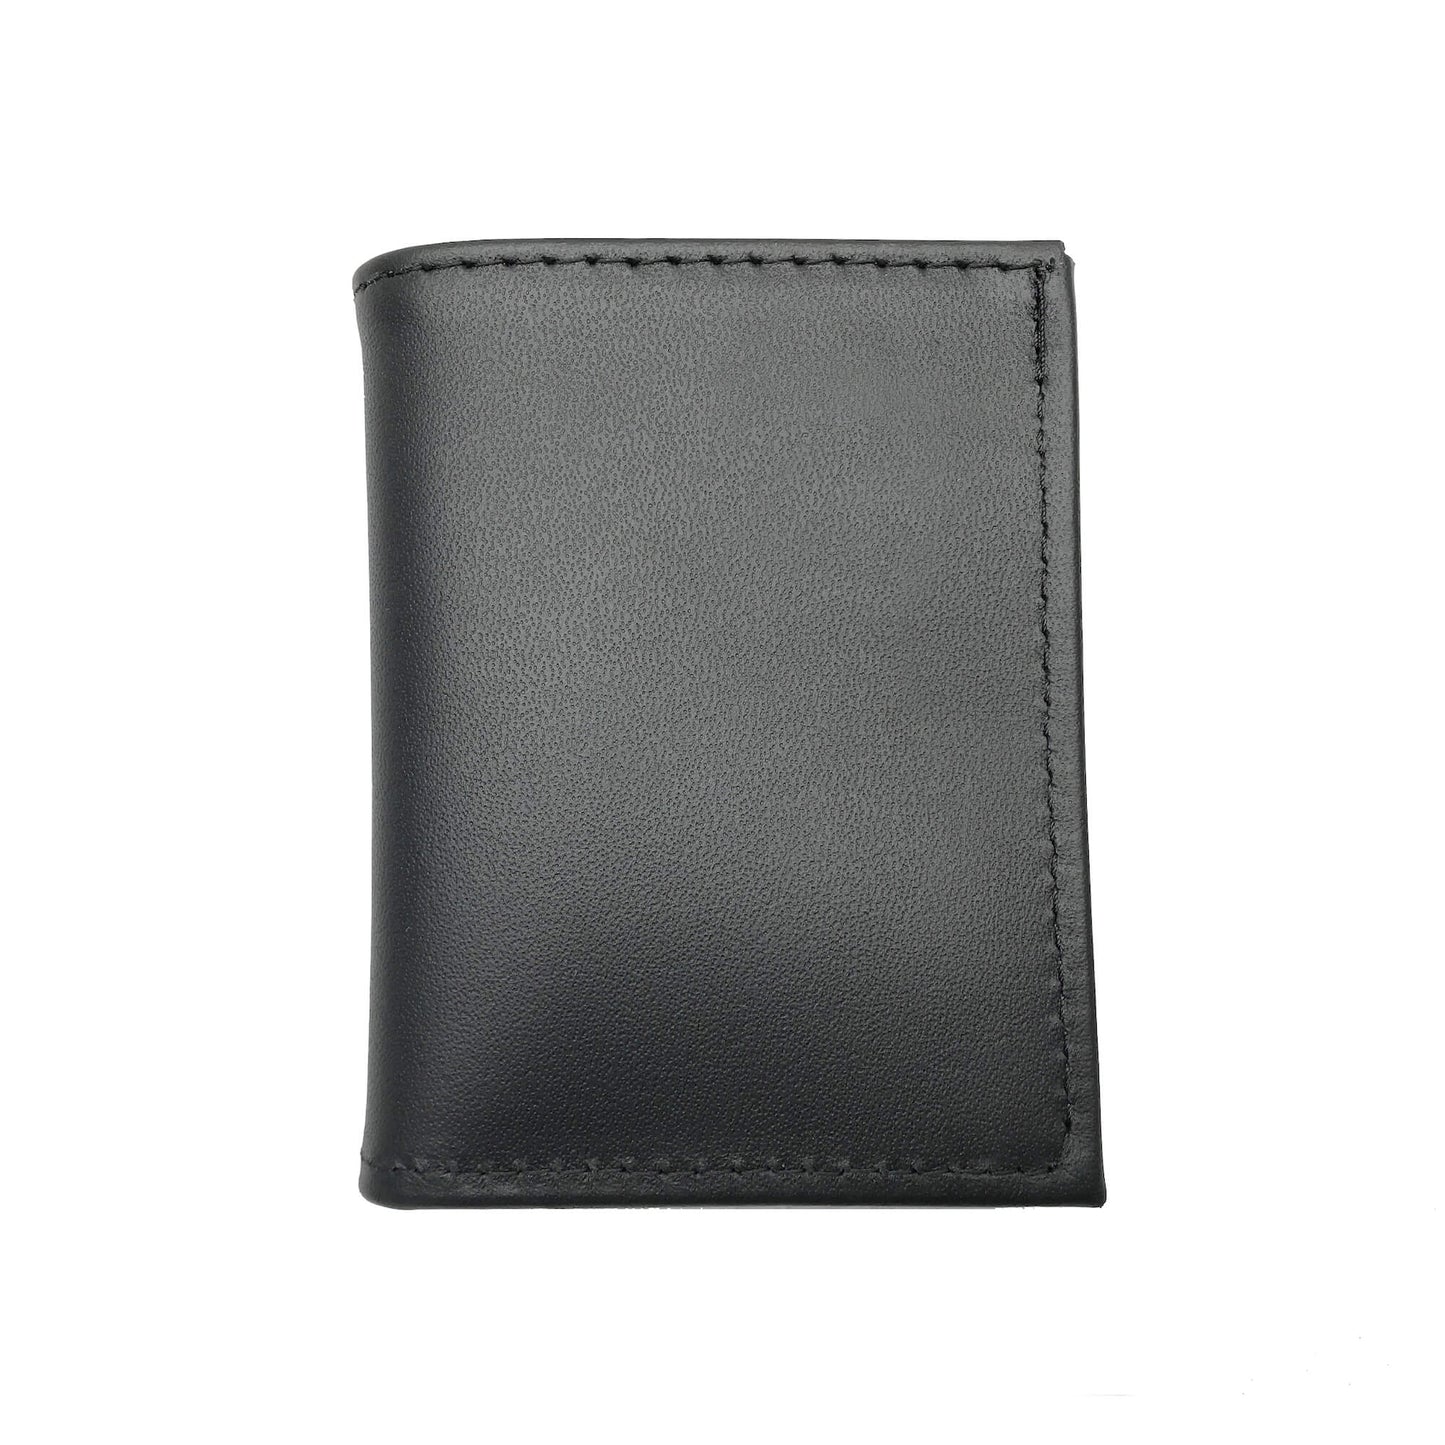 New Jersey Department of Corrections (DOC) Sergeant & Up Hidden Badge Wallet-Perfect Fit-911 Duty Gear USA